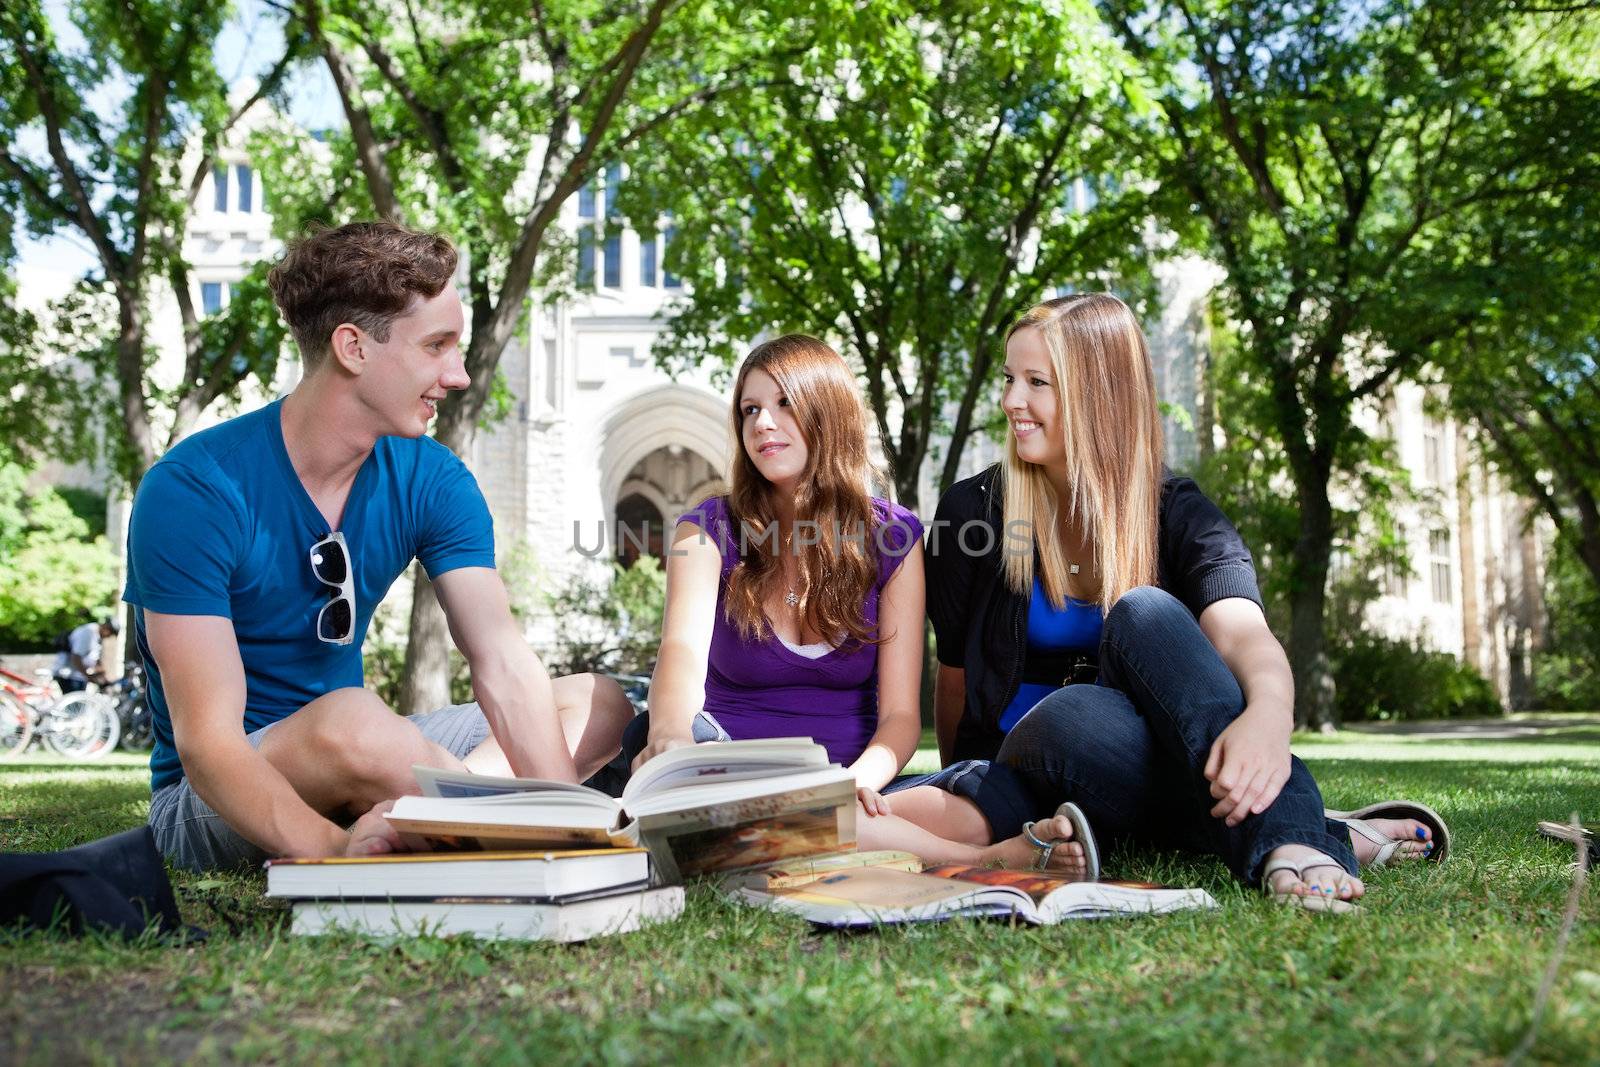 Students on campus ground by leaf